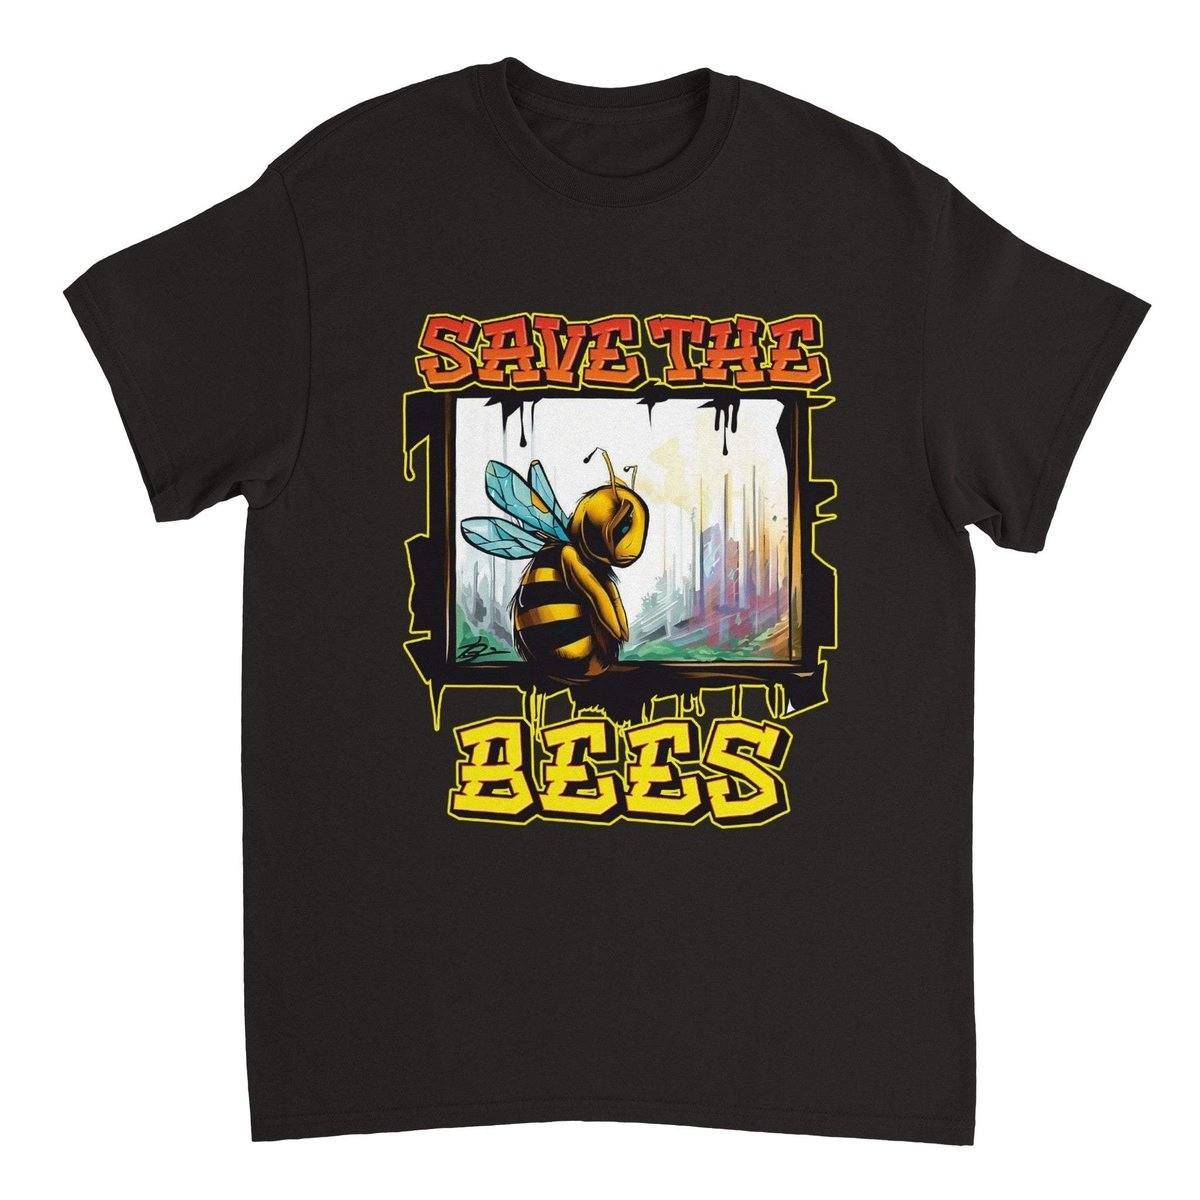 Save The Bees Tshirt - Crying Bee Window - Unisex Crewneck T-shirt Australia Online Color Black / S